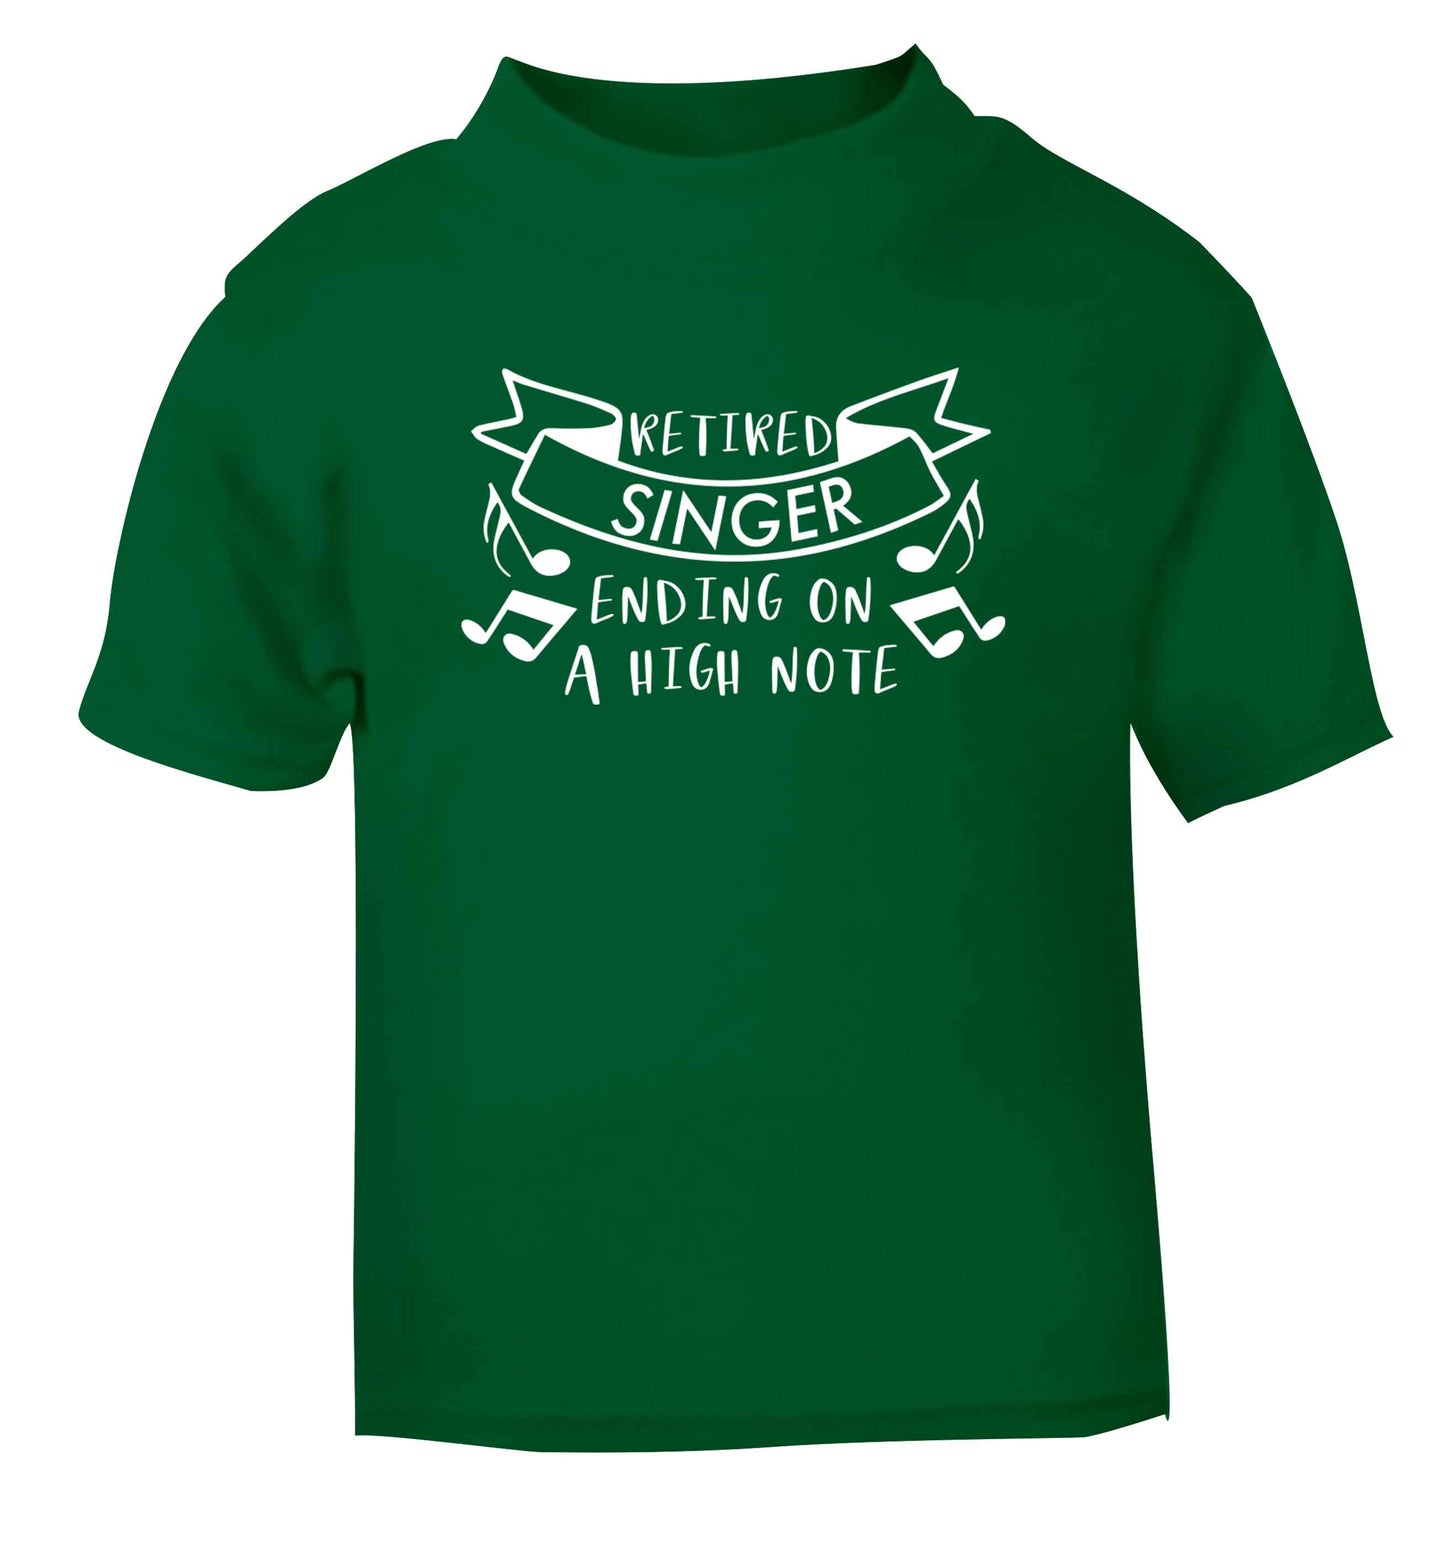 Retired singer ending on a high note green Baby Toddler Tshirt 2 Years